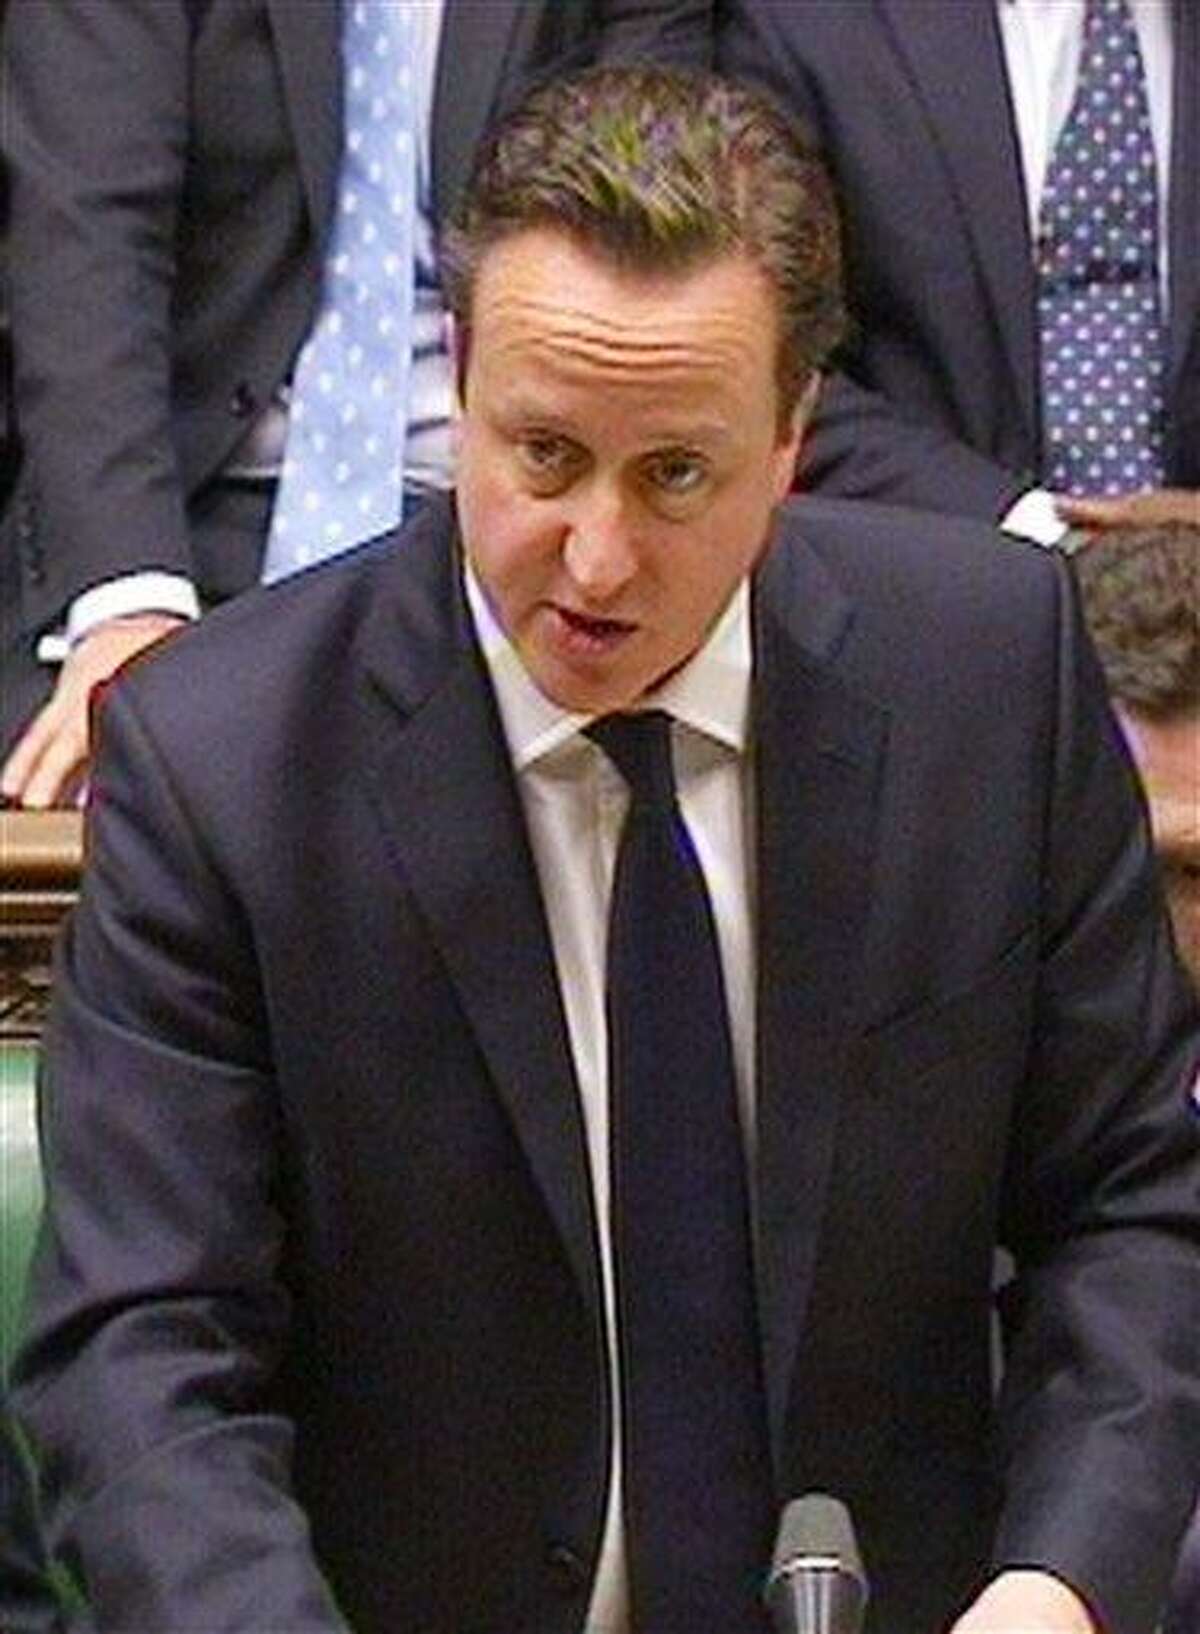 Britain's Prime Minister David Cameron speaking to the House of Commons in London in this image taken from TV Friday , where the prime minister spoke about the kidnap situation in Algeria. AP Photo